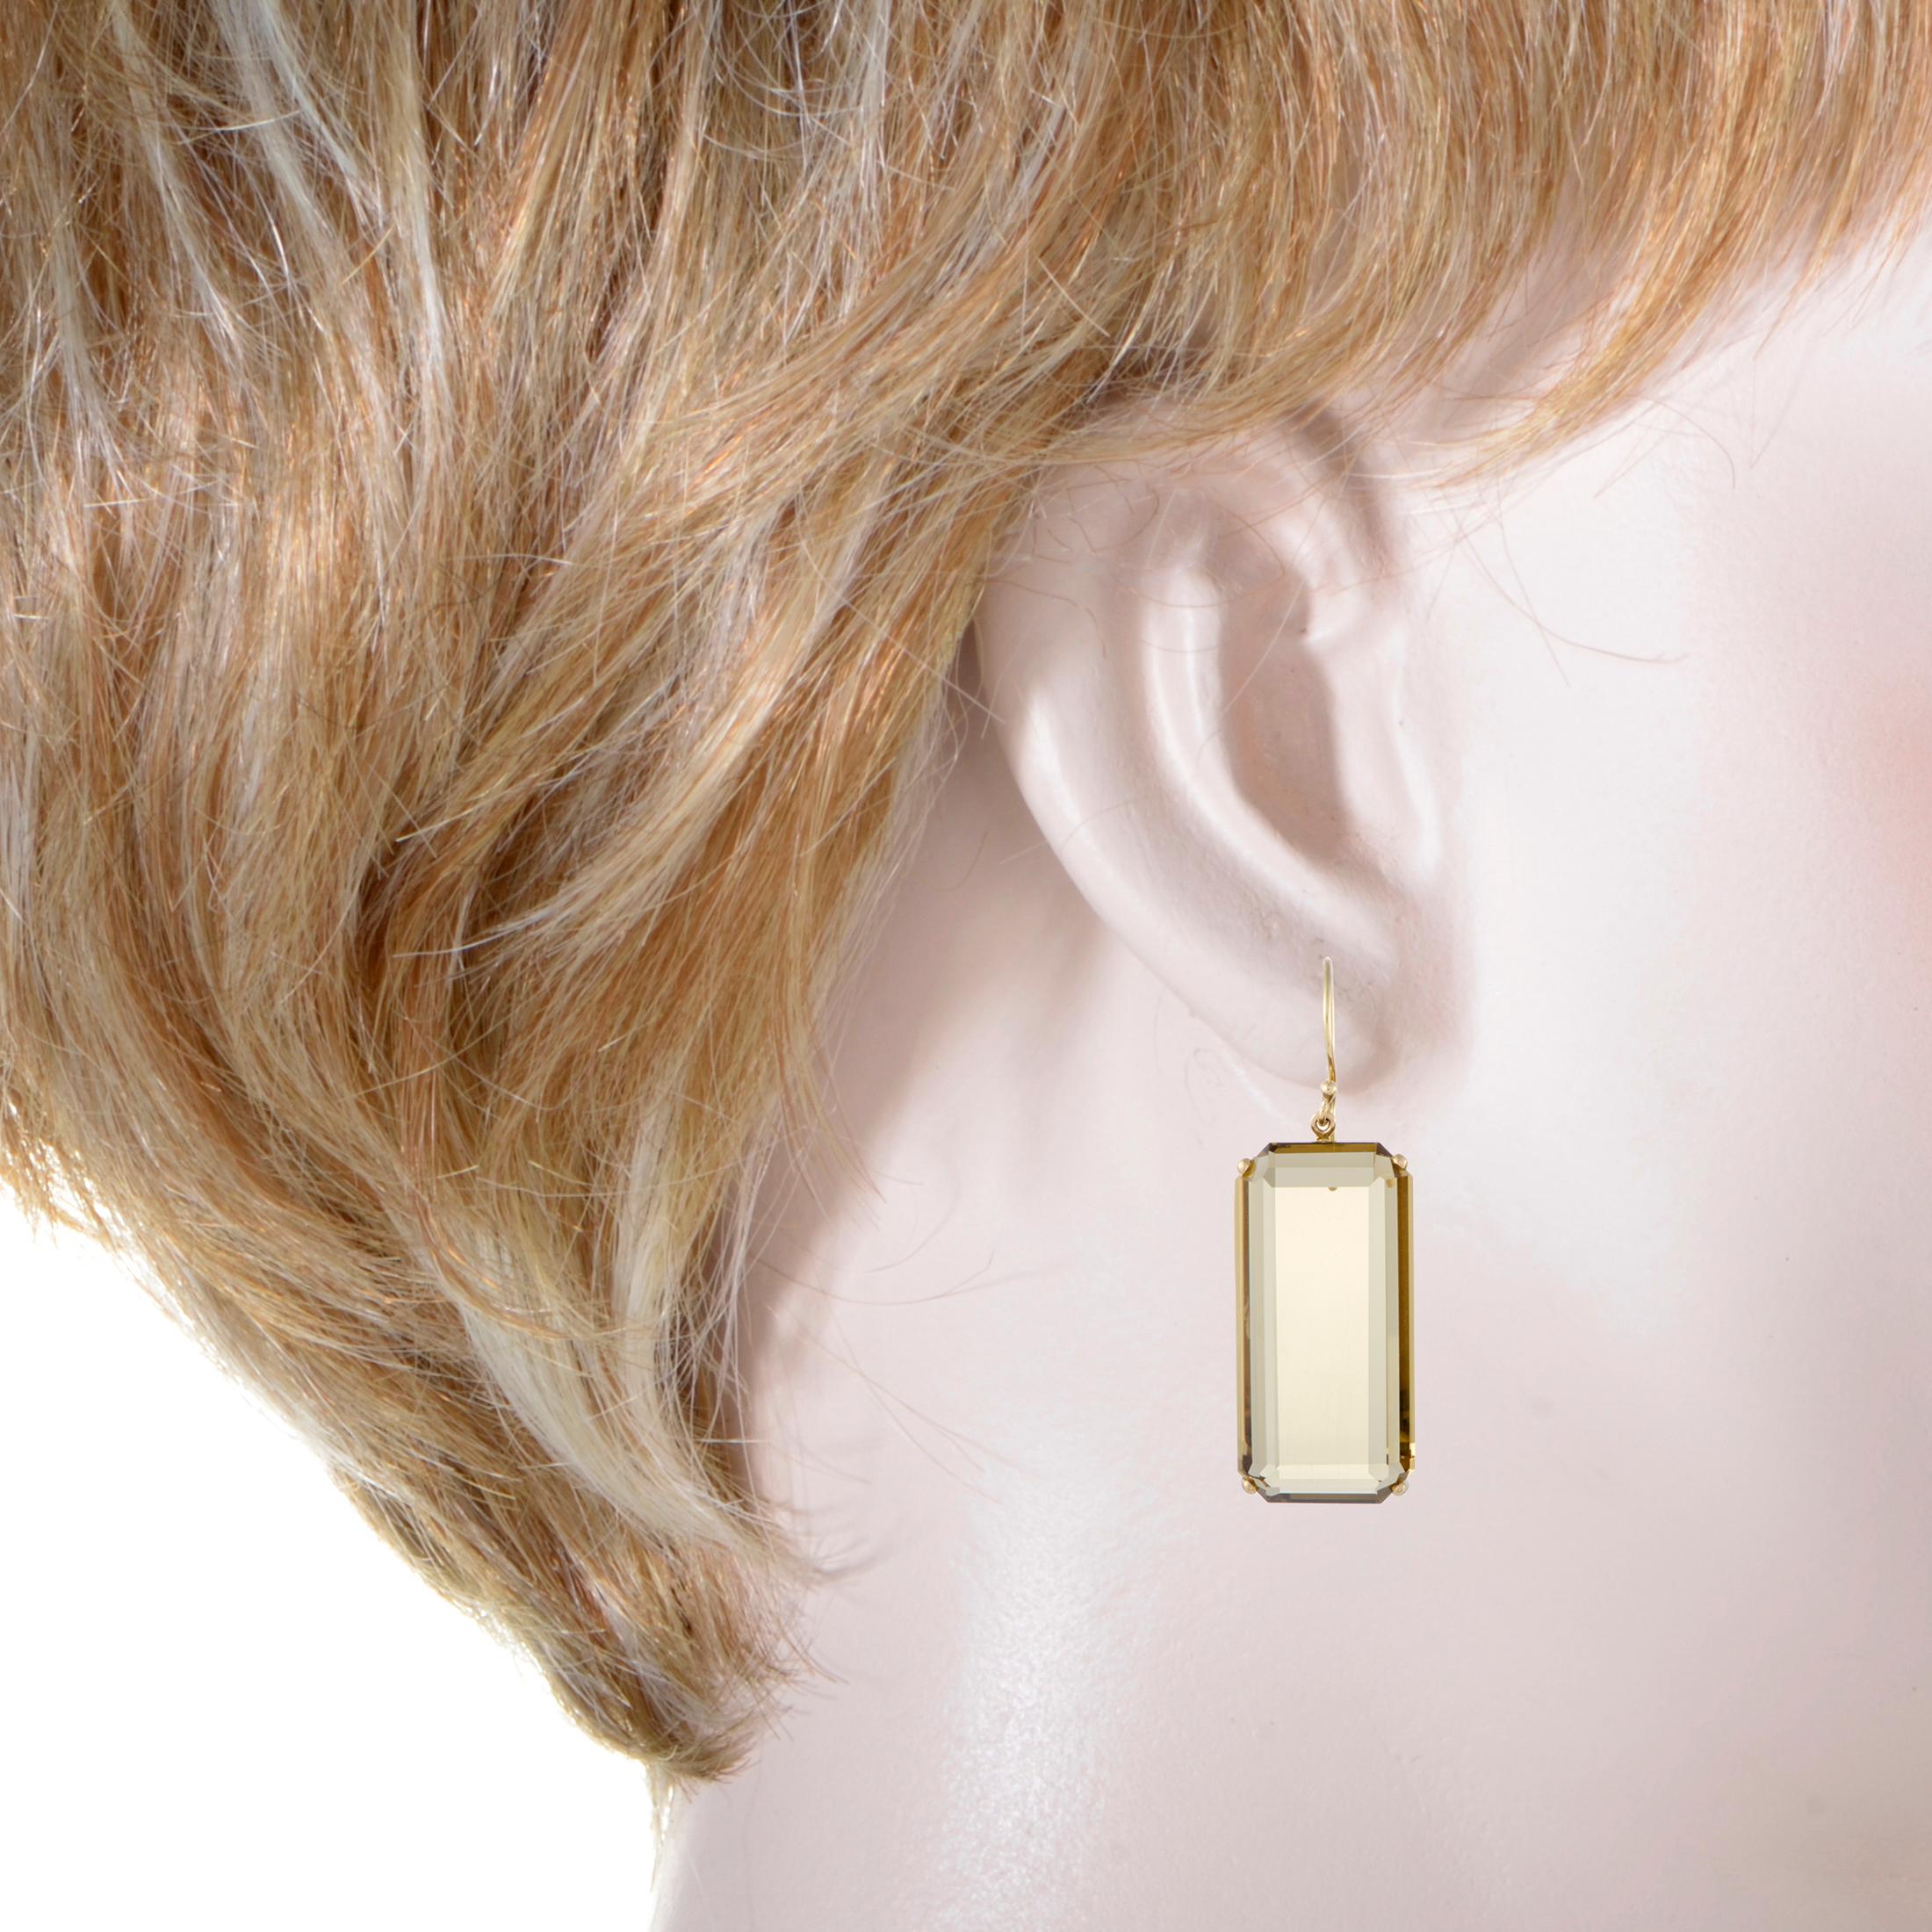 Marvelously cut orange citrine stones take the central spot in these exceptionally elegant Ippolita earrings, made of gleaming 18K yellow gold for the splendid “Rock Candy” collection.
